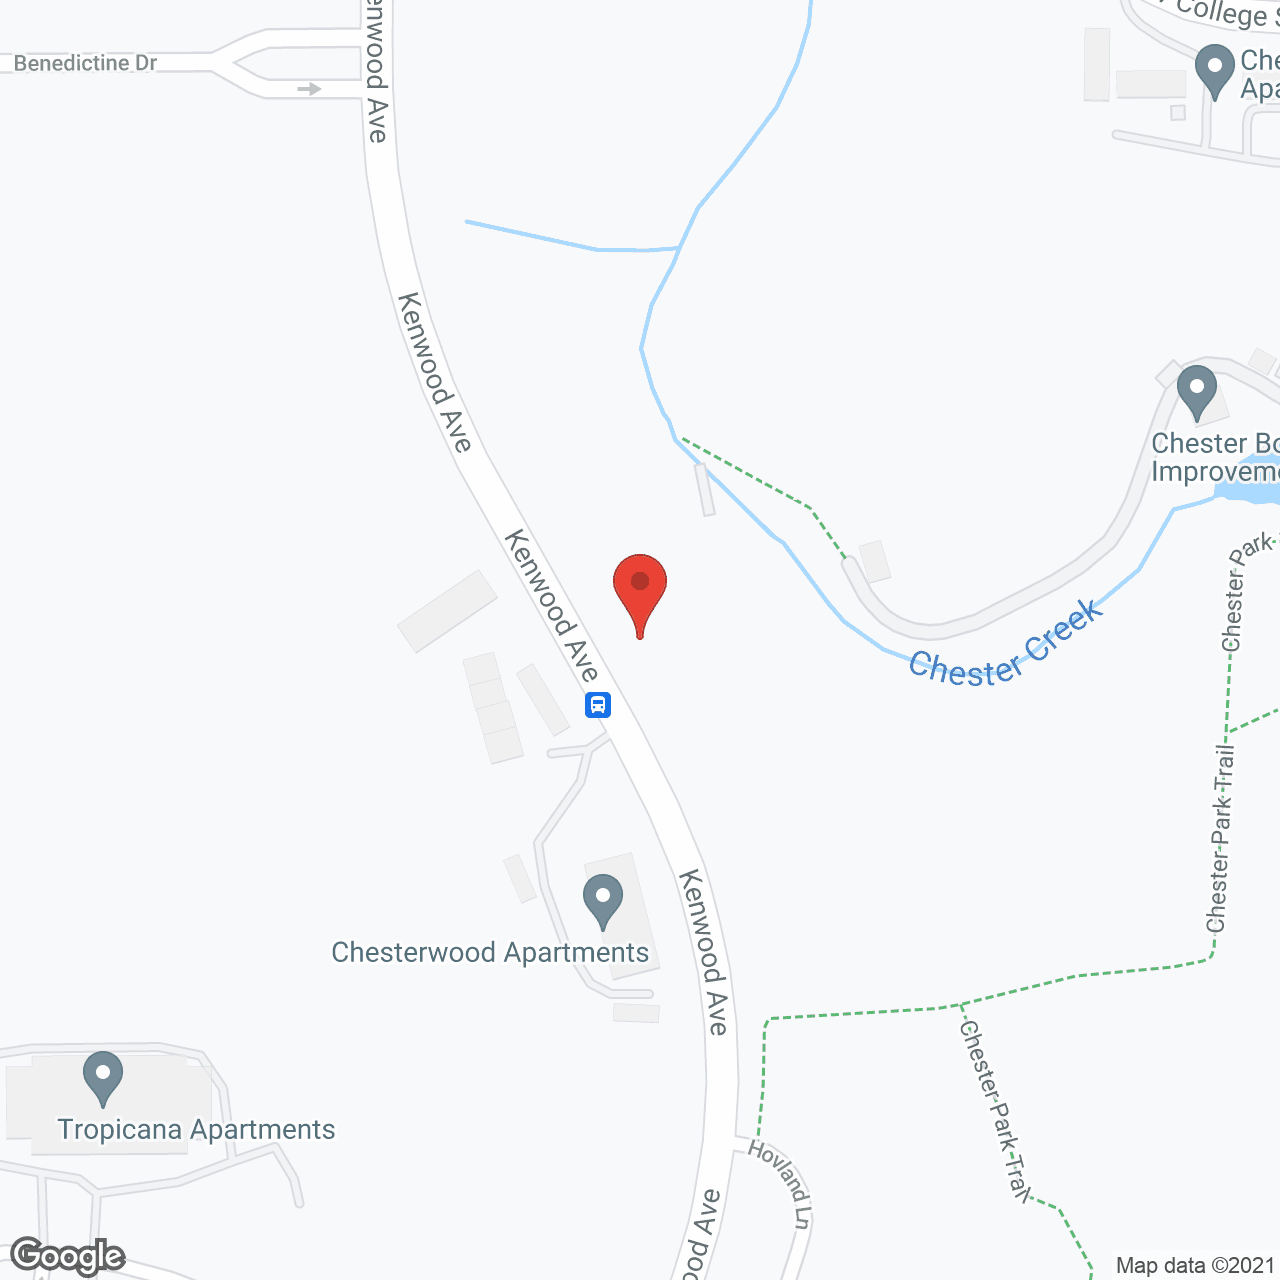 Chesterwood in google map